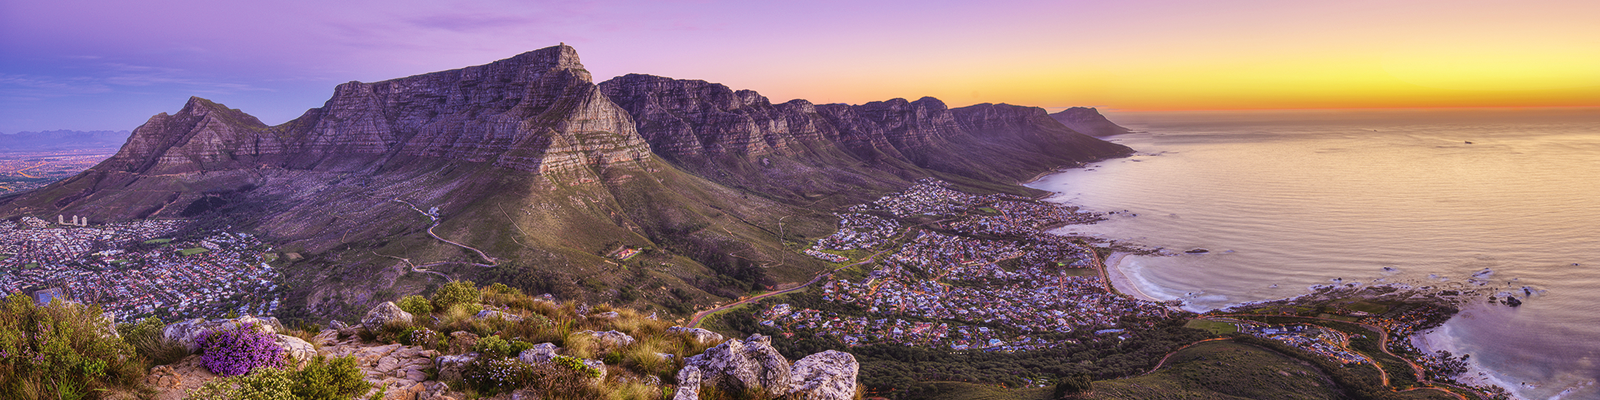 Let's get adventurous in exciting Cape Town!